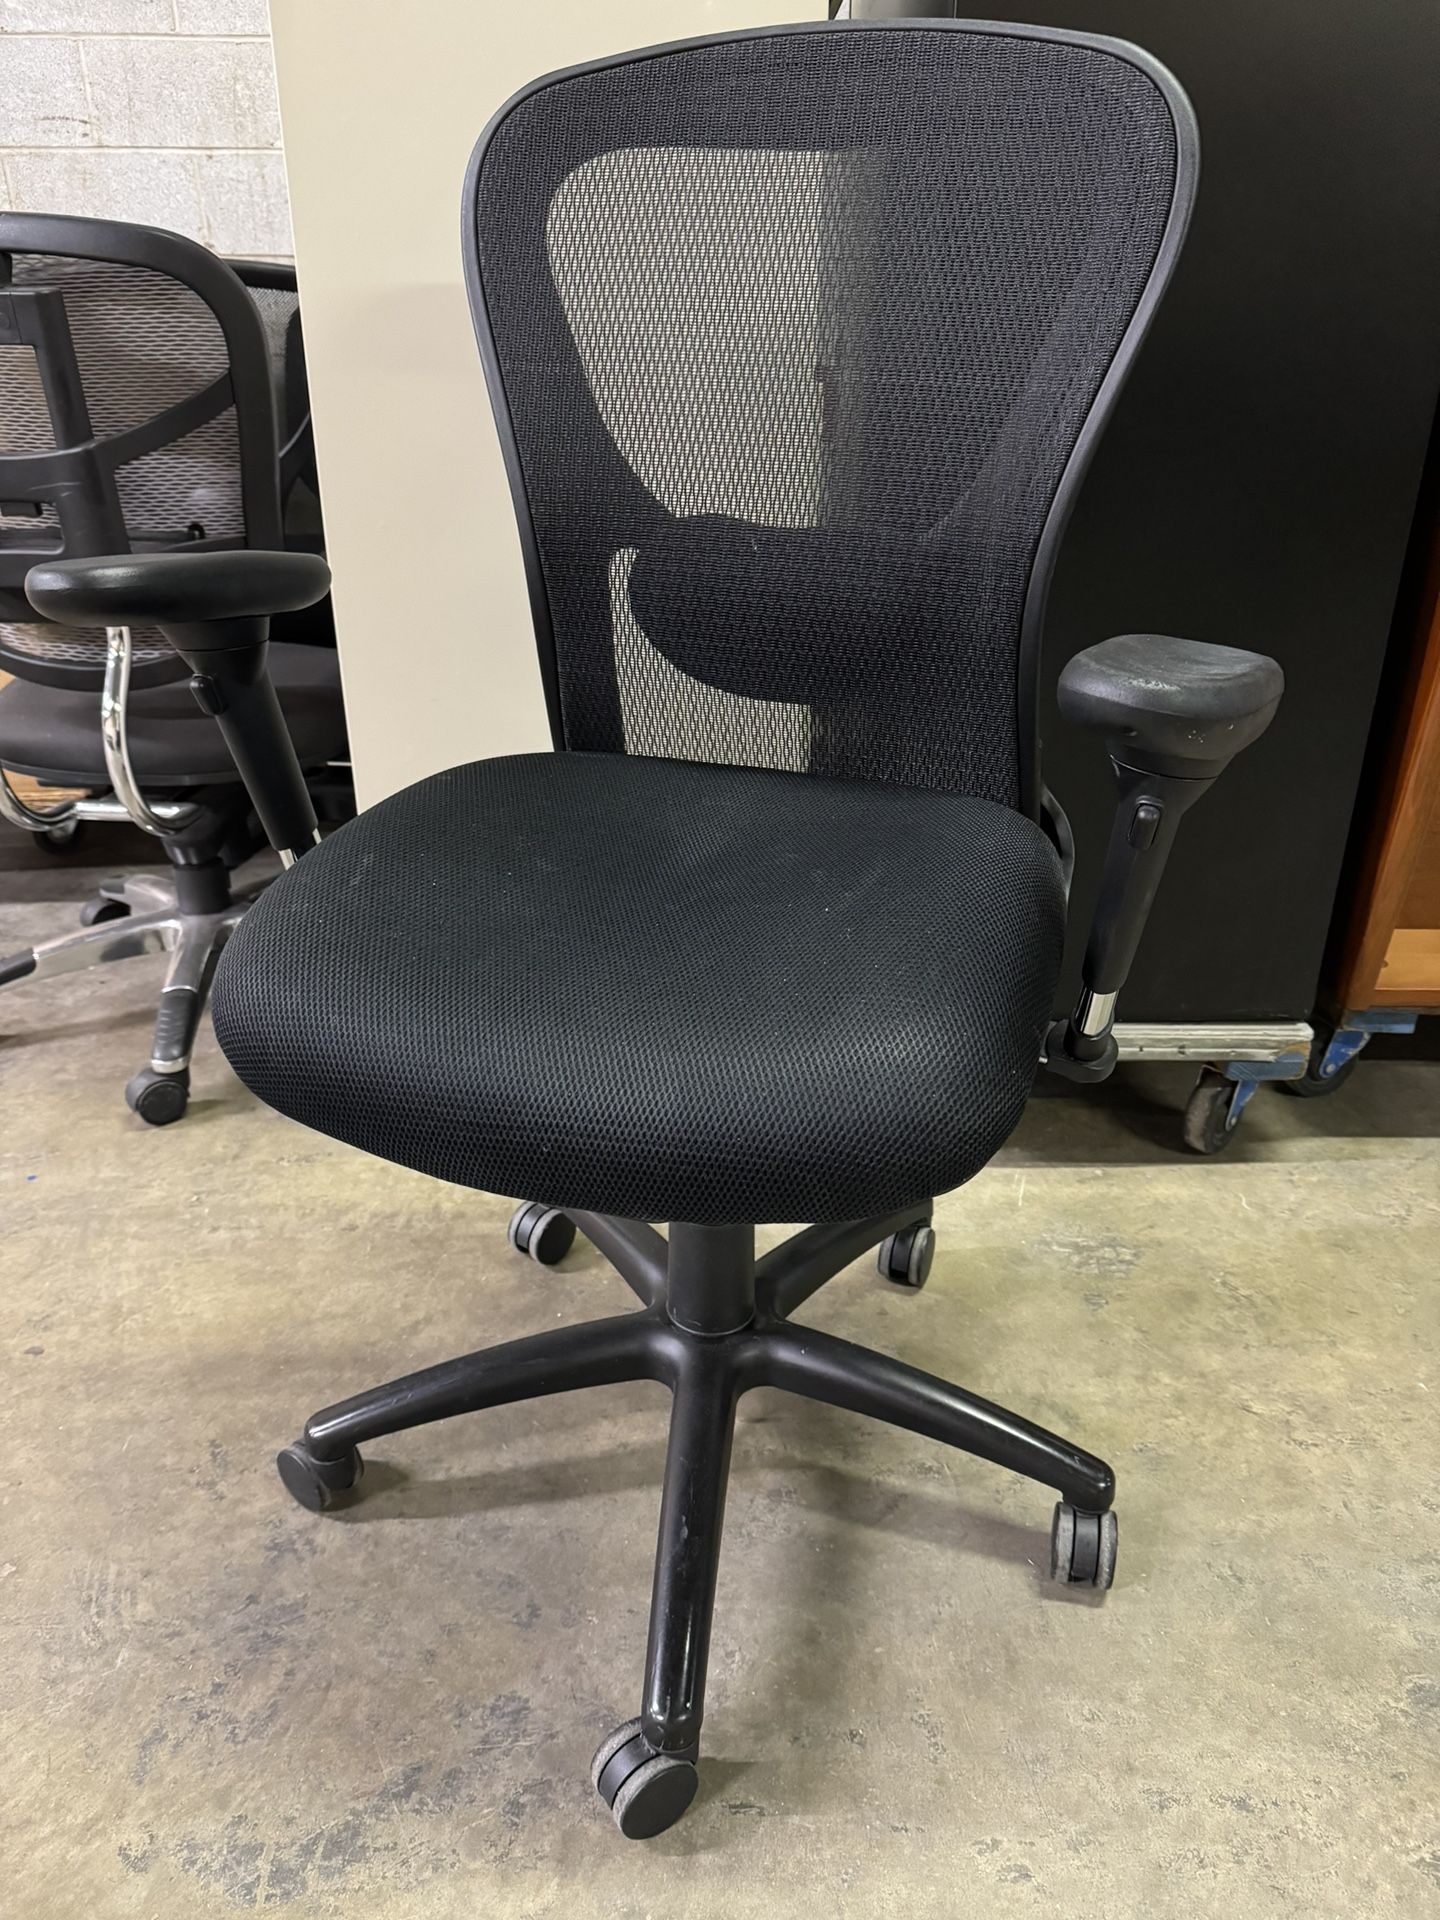 Mesh Back Desk Chairs - Priced To Move 